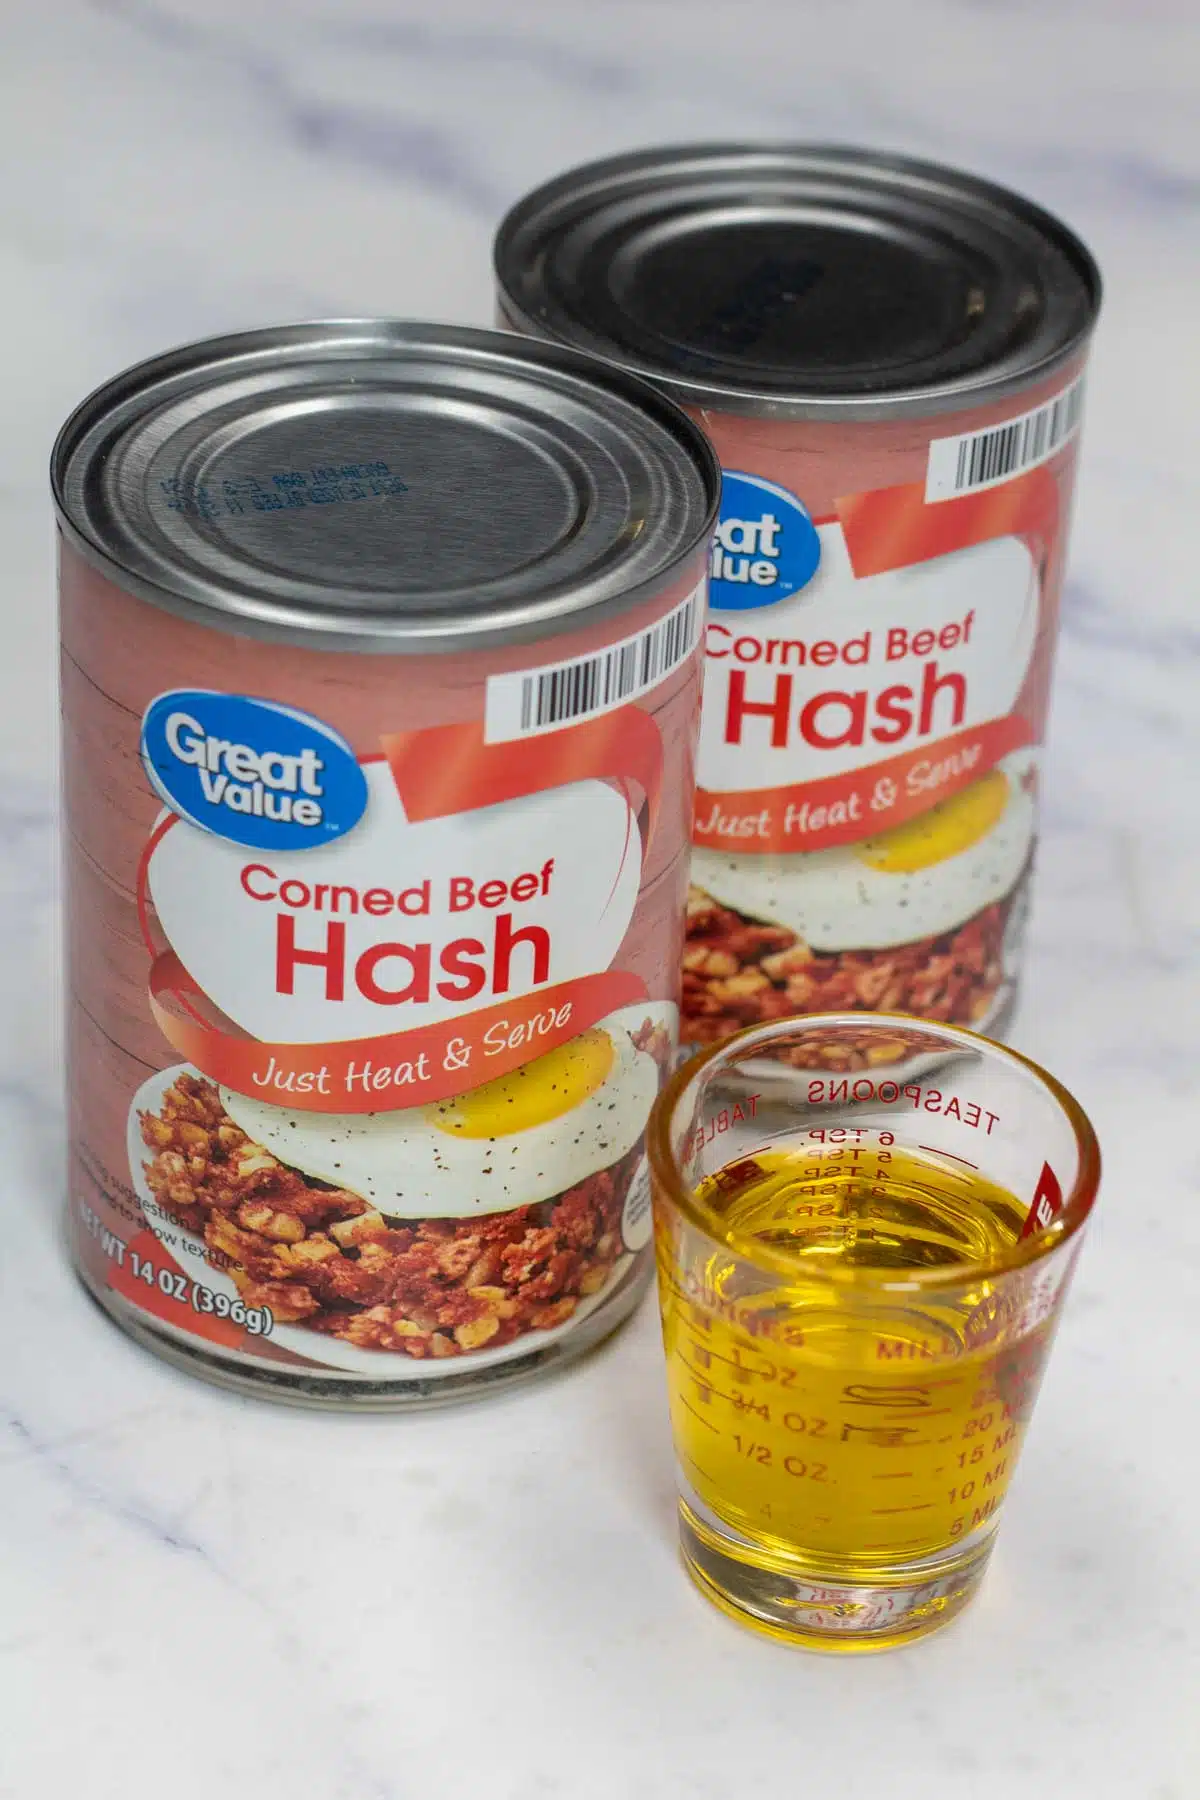 Tall image showing ingredients for canned corned beef hash.